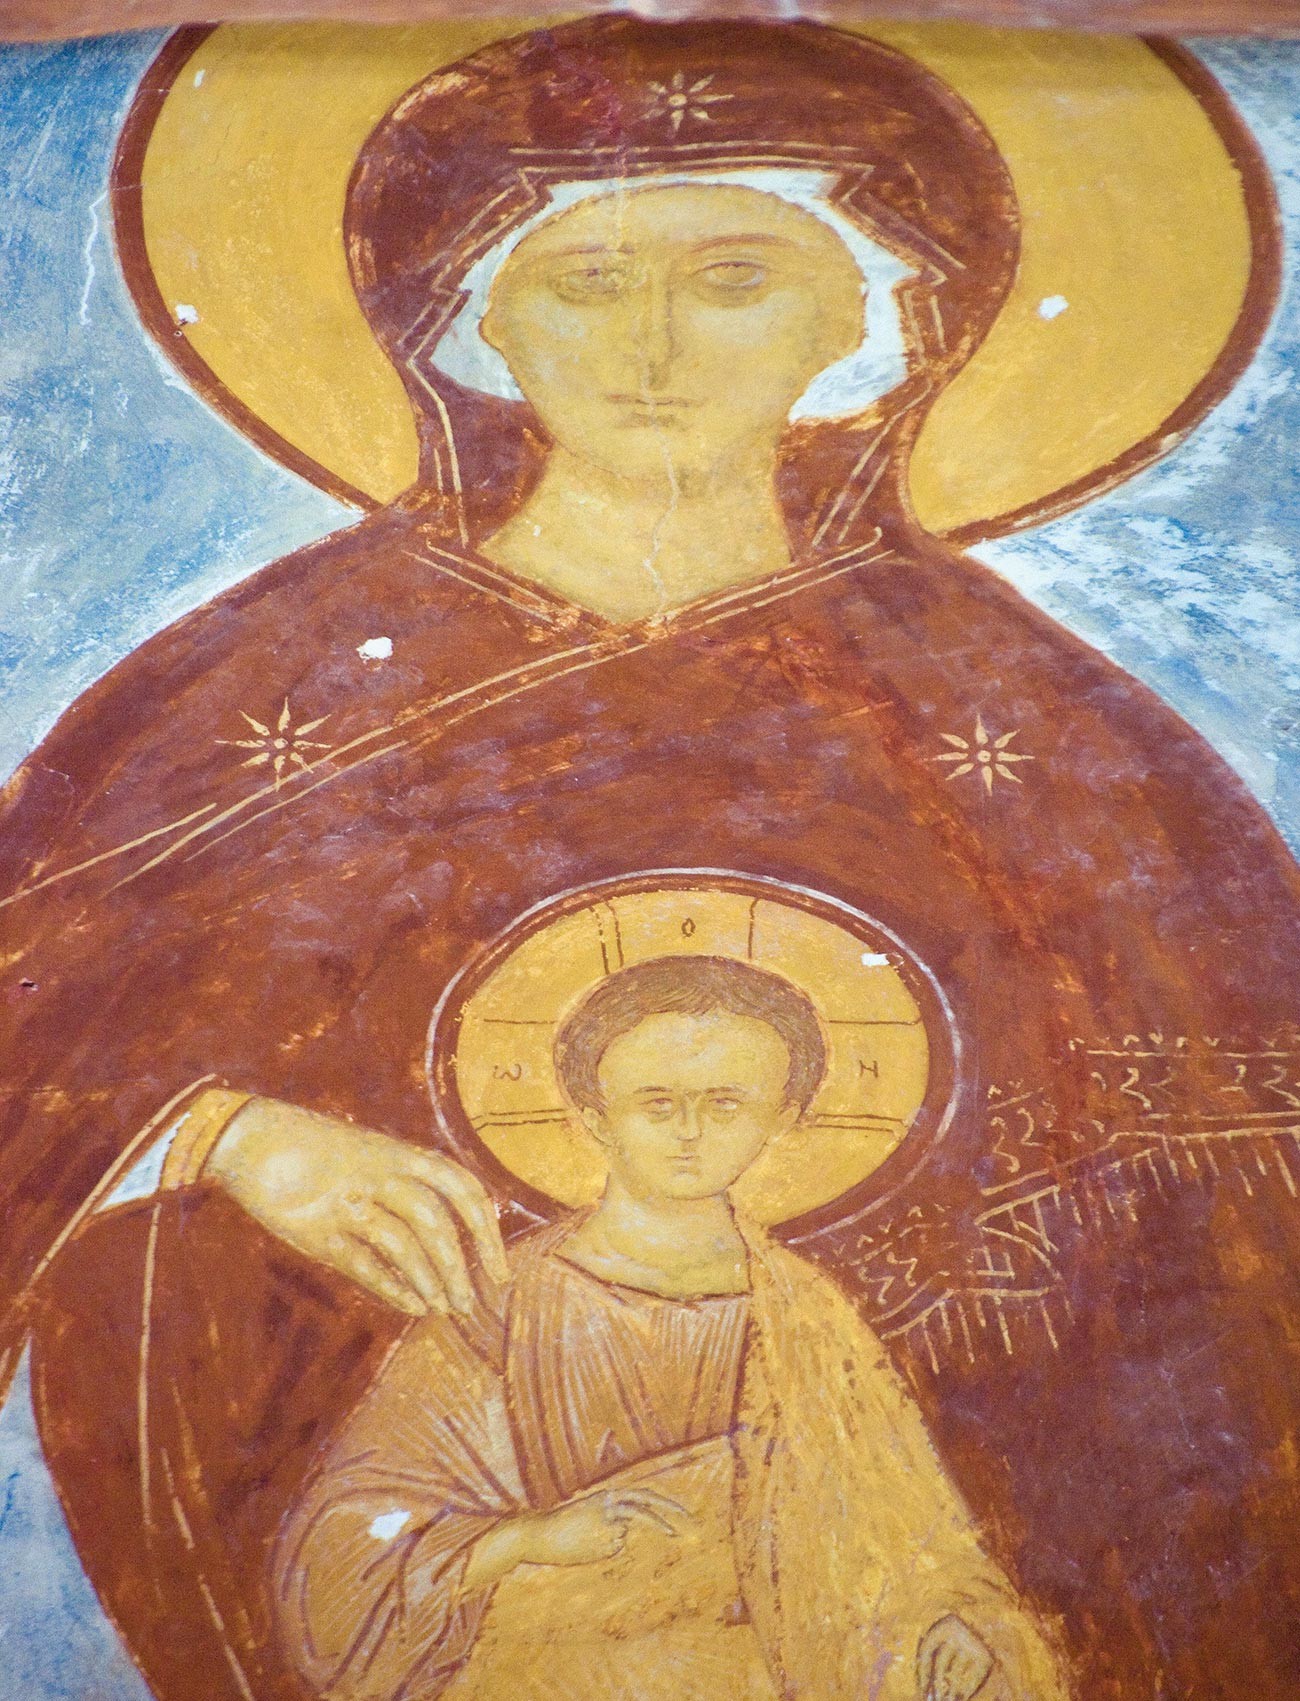 Cathedral of Nativity. Central apse. Fresco of Mary enthroned with Christ Child. June 1, 2014 